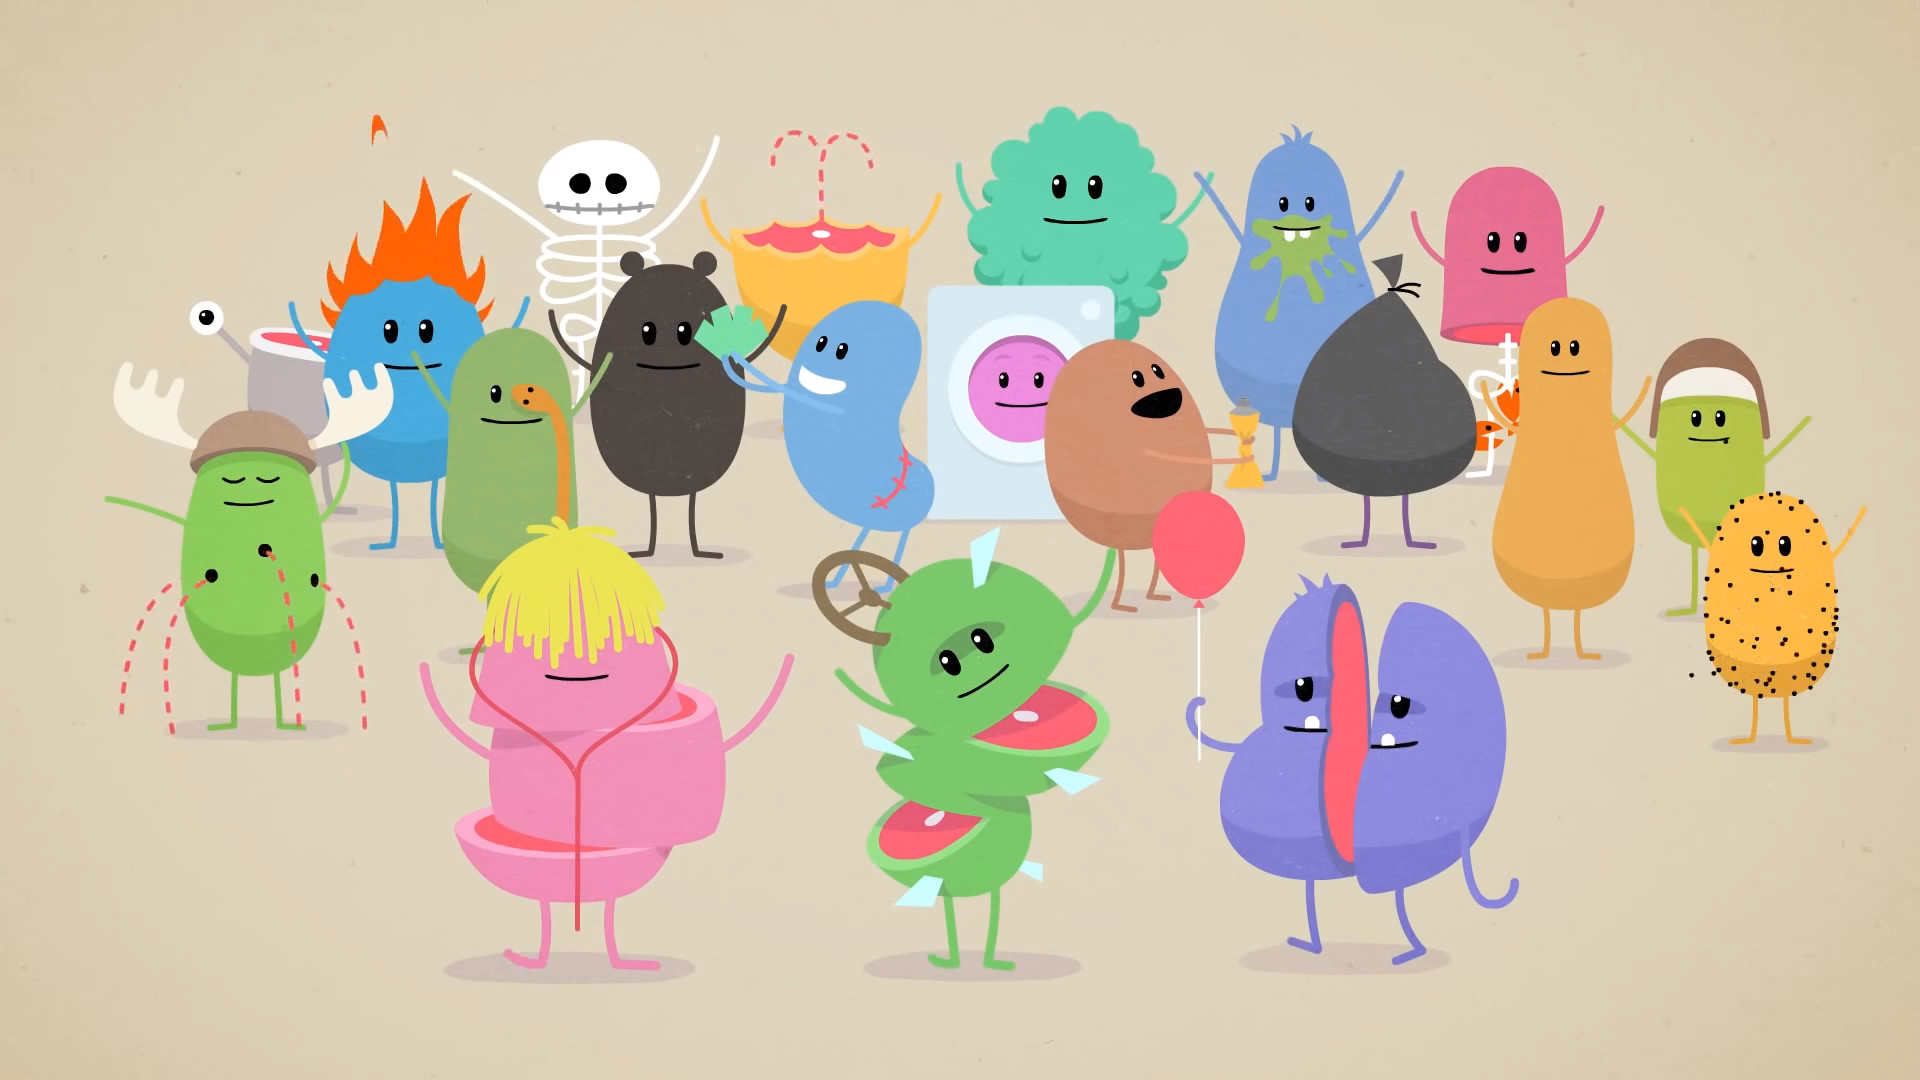 Life Insurance, a Safety Video, and Dumb Ways to Die